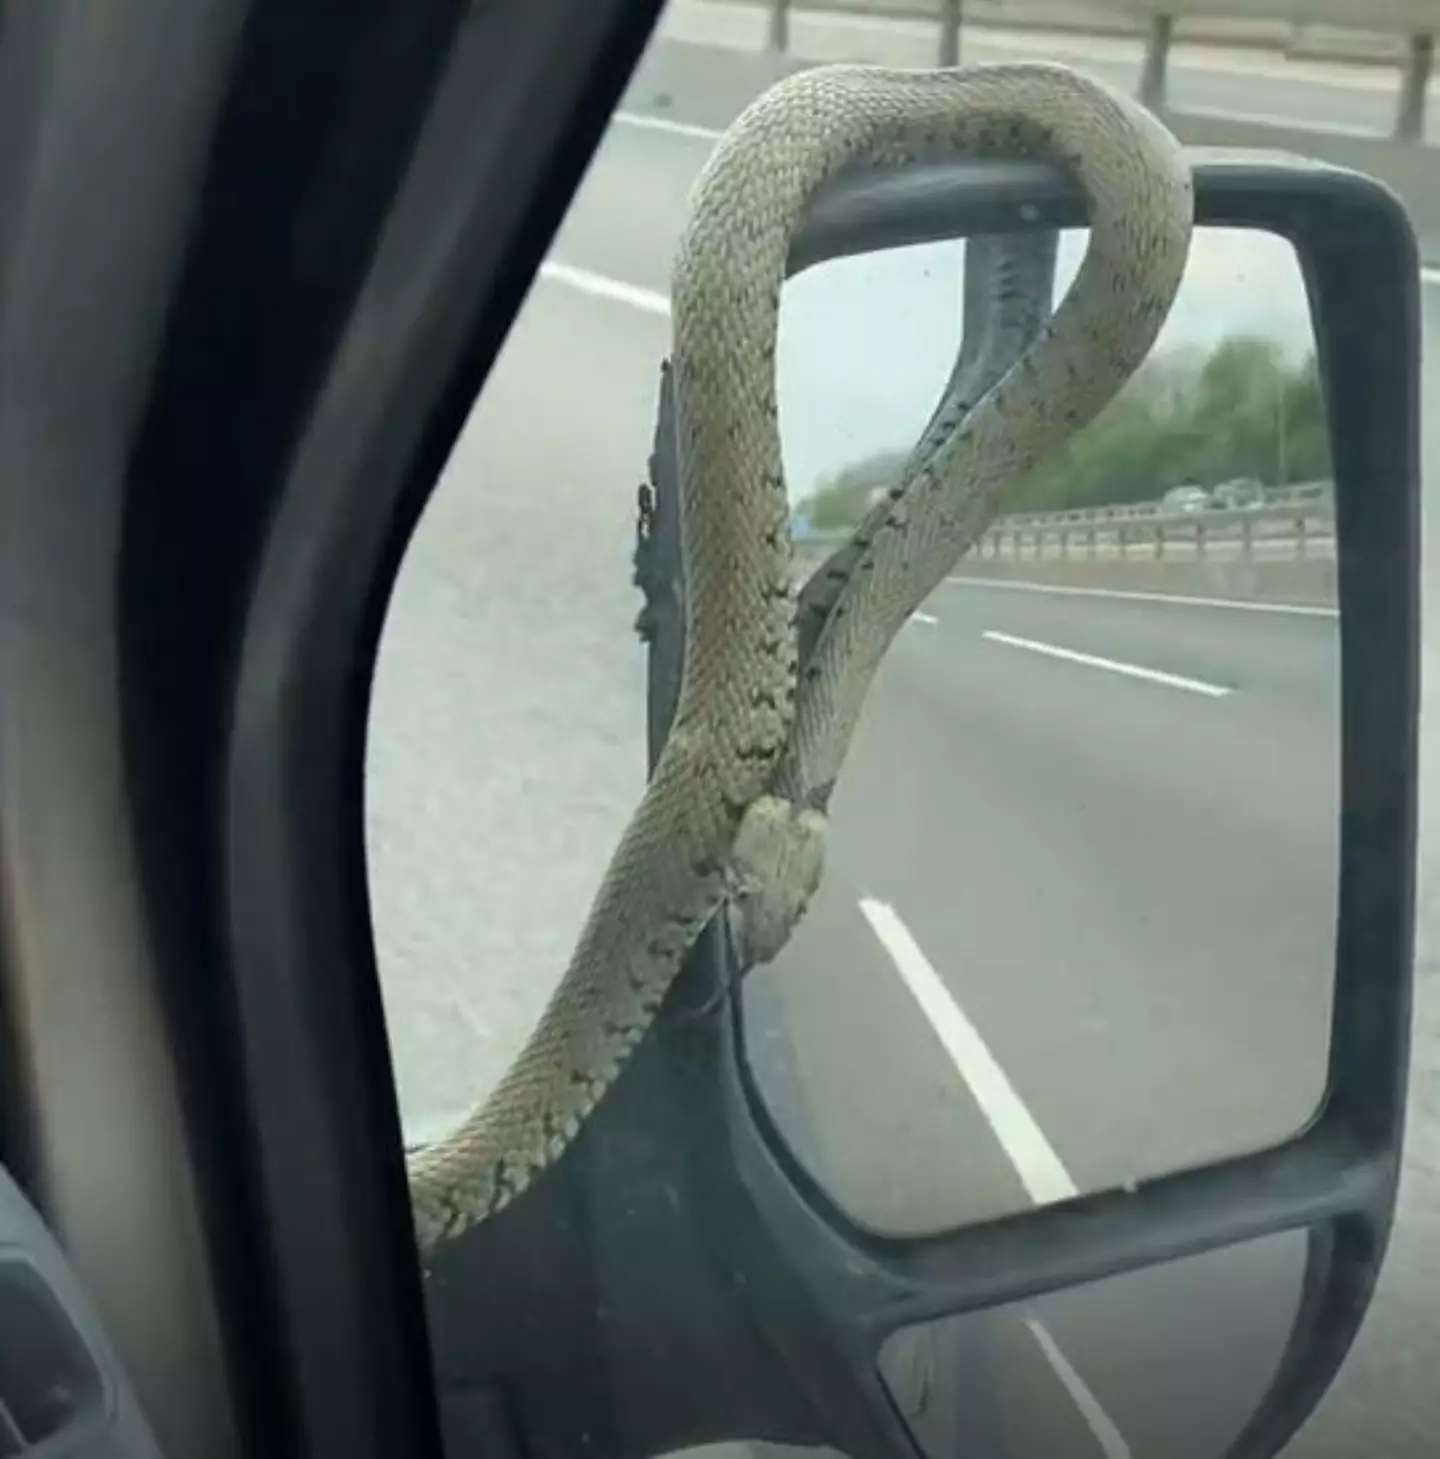 A snake hitched a ride on a car on the motorway.